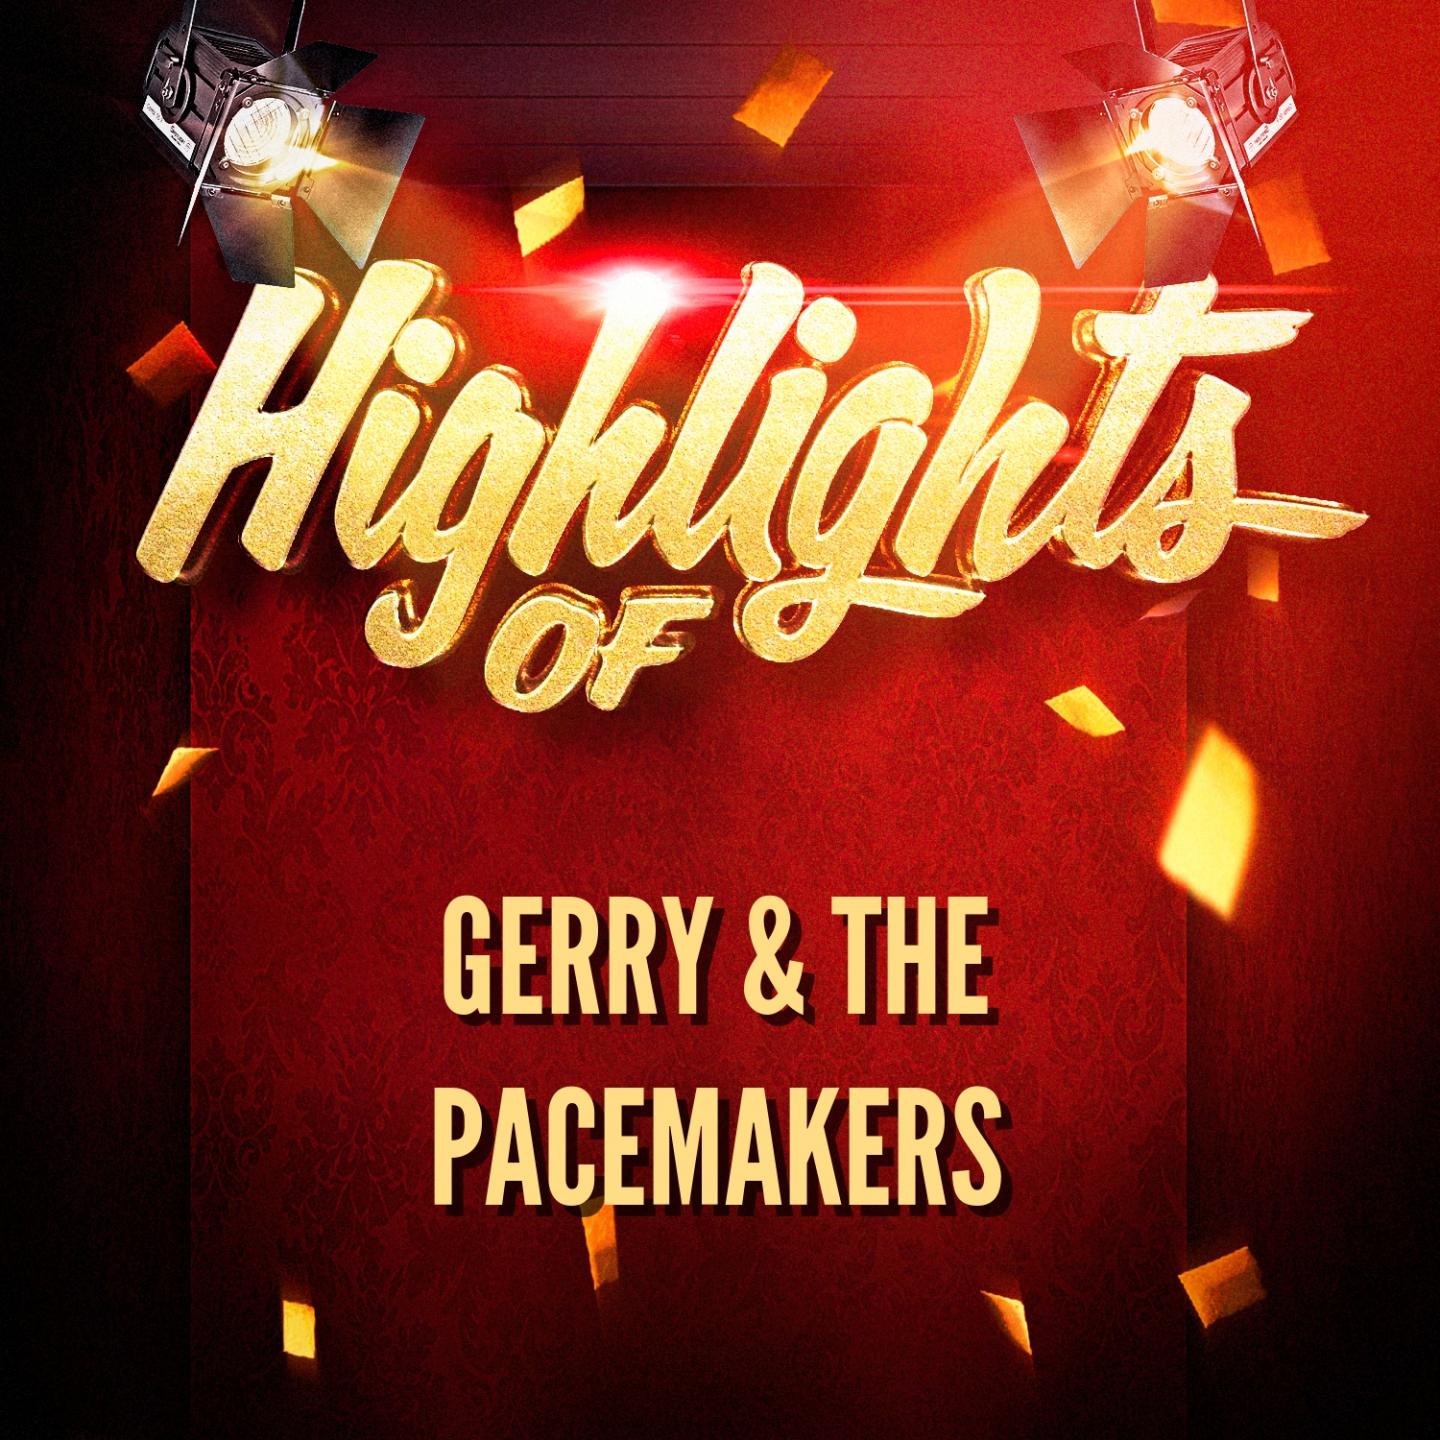 Highlights of Gerry & The Pacemakers